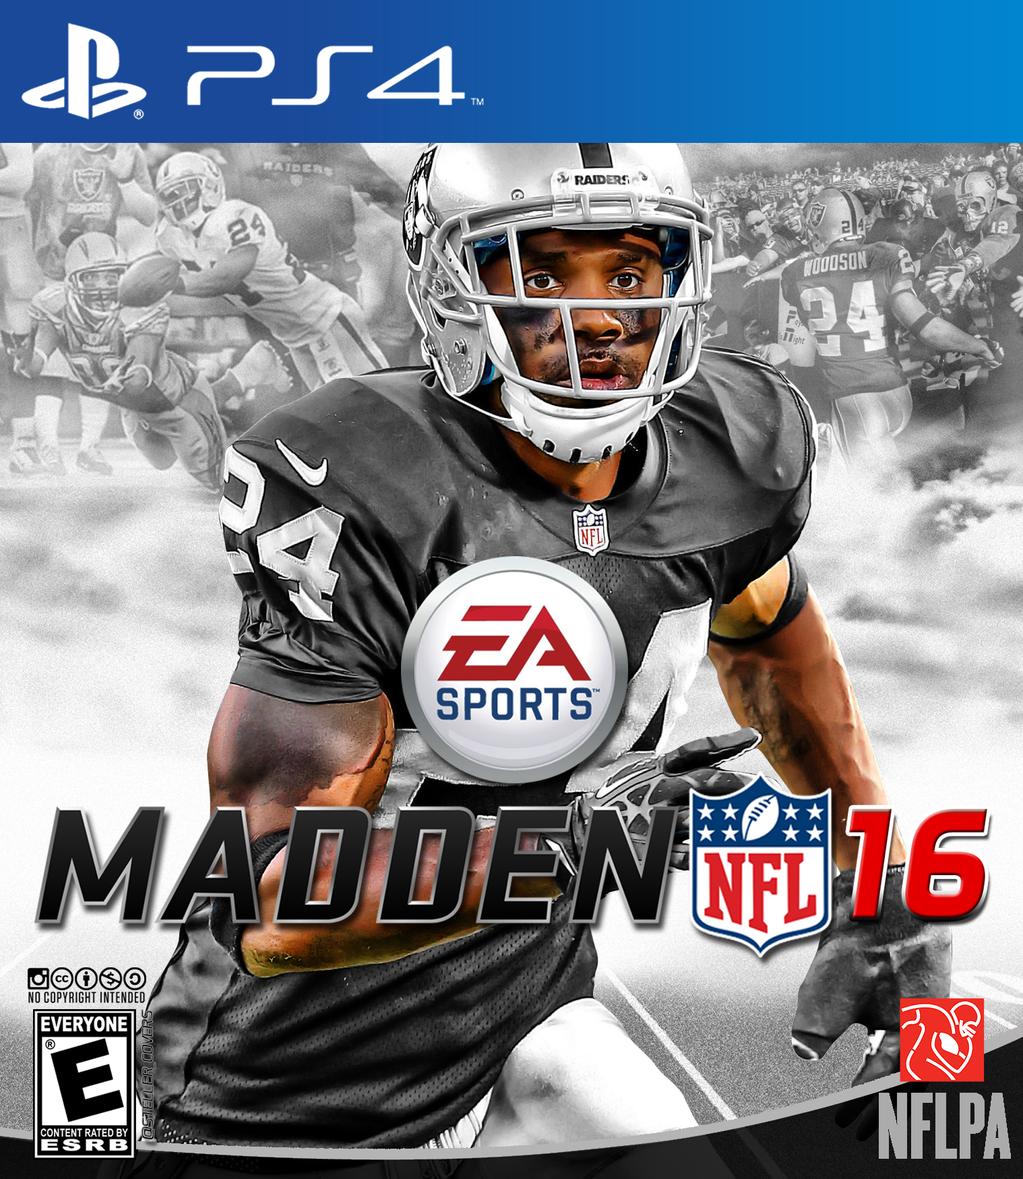 Madden 16 Covers - Page 7 of 8 - @NFLRT